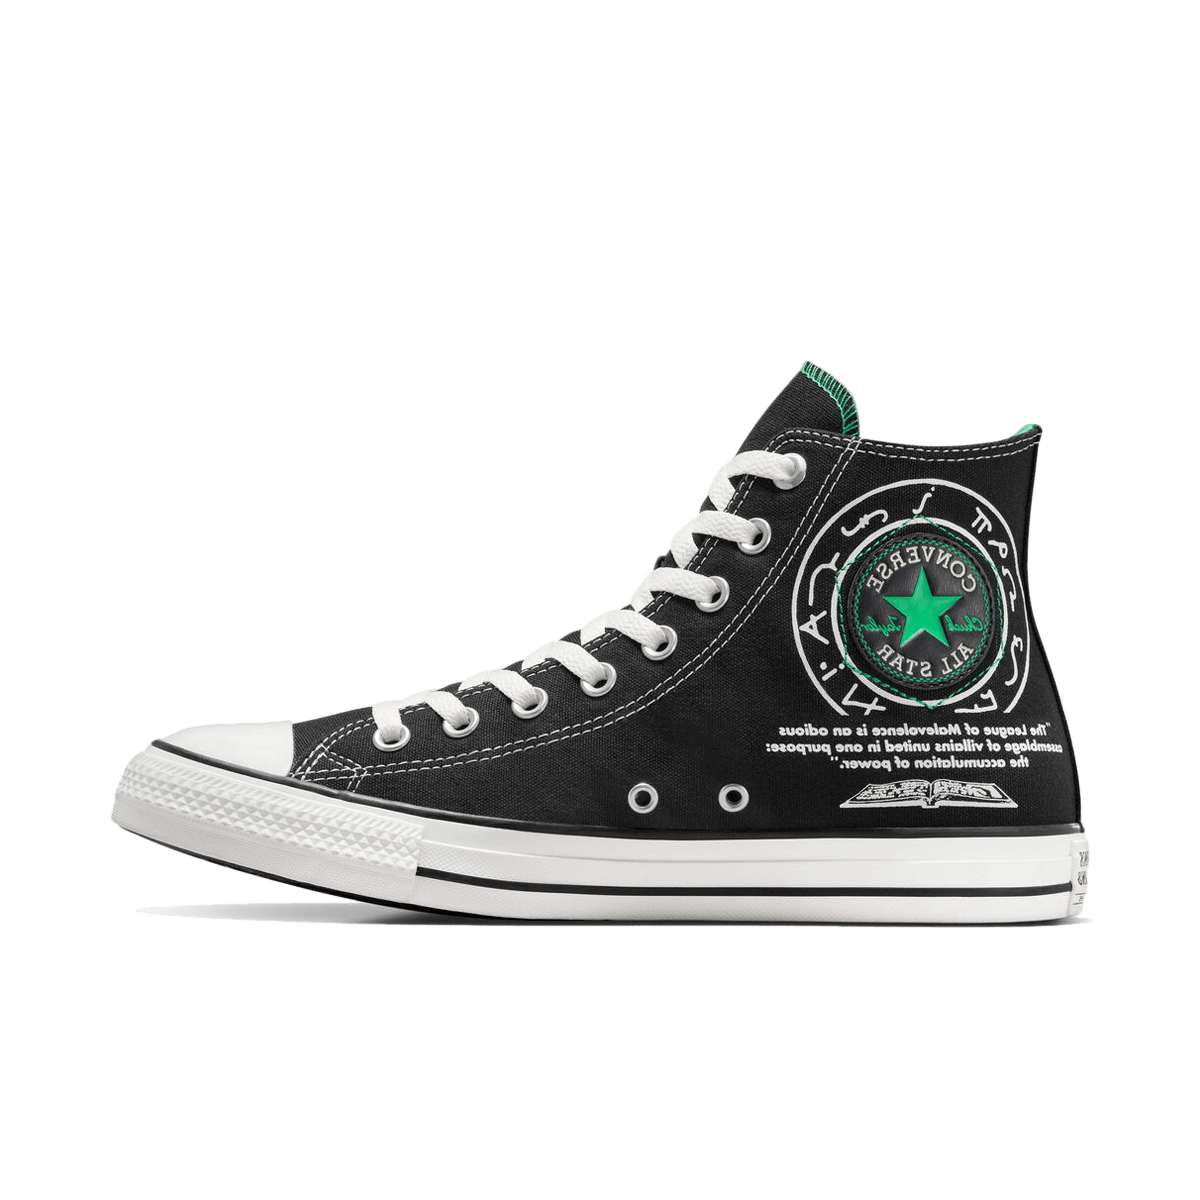 Dungeons & Dragons x Converse Chuck Taylor All Star 'League of Malevolence' A09885C